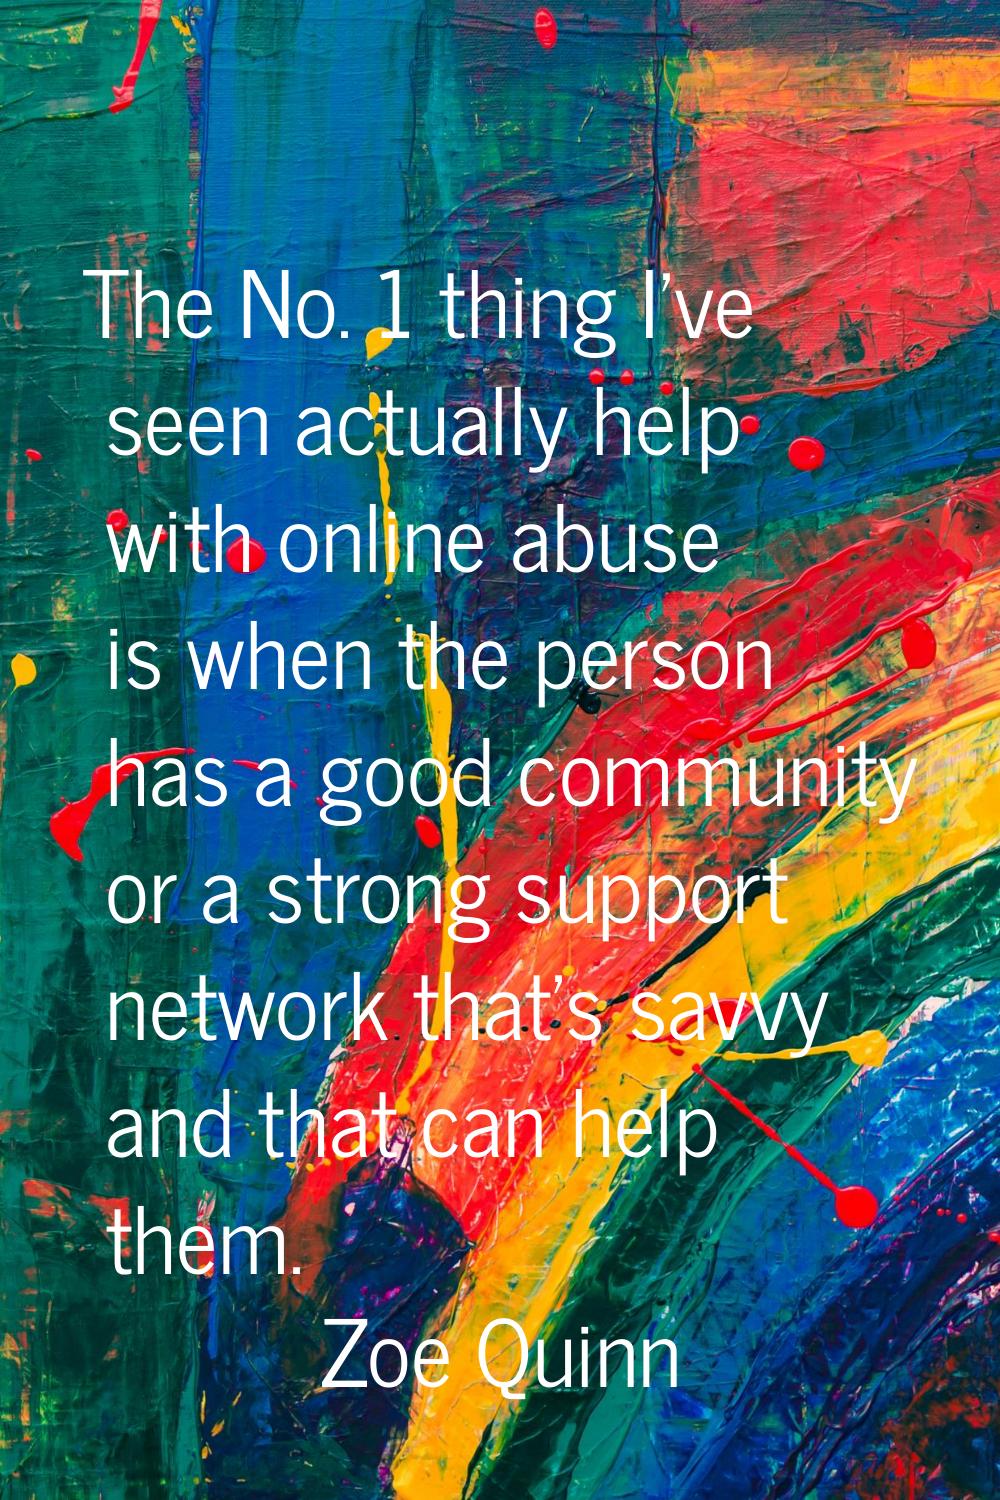 The No. 1 thing I've seen actually help with online abuse is when the person has a good community o